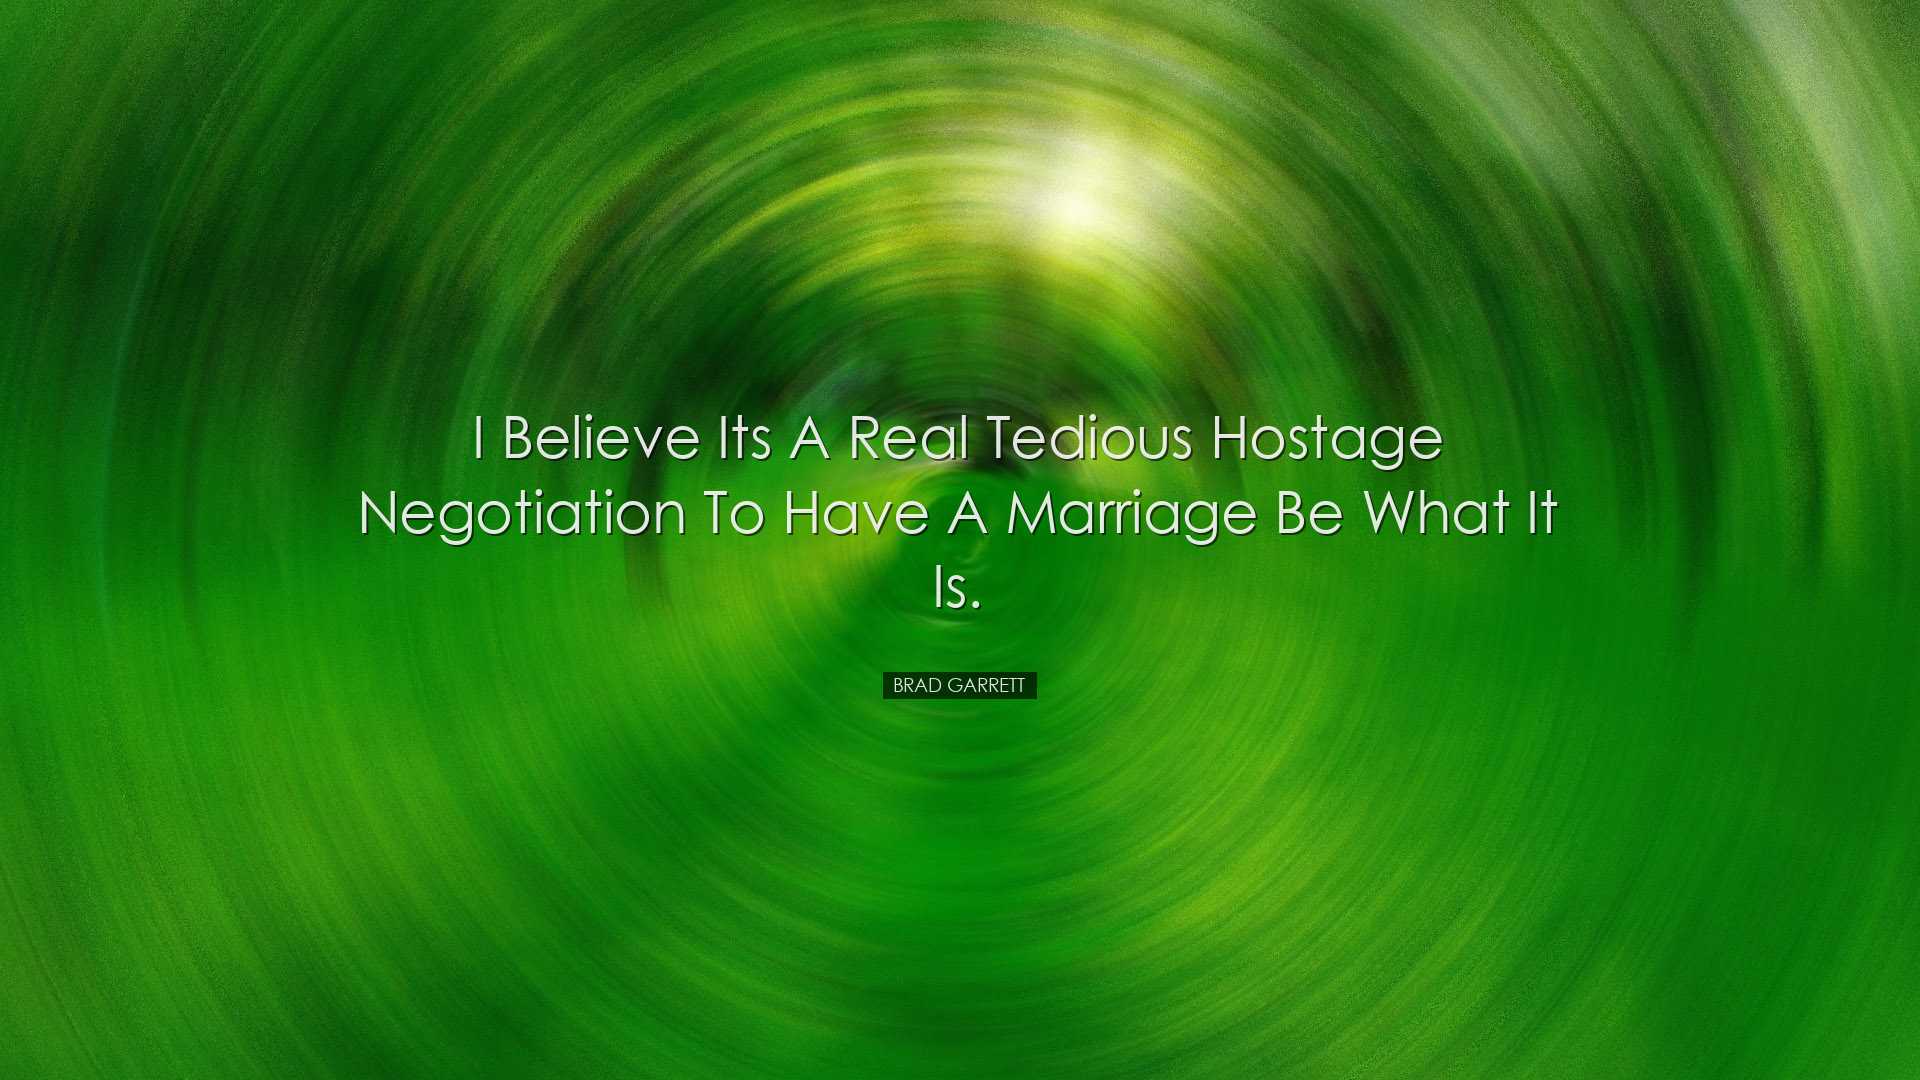 I believe its a real tedious hostage negotiation to have a marriag